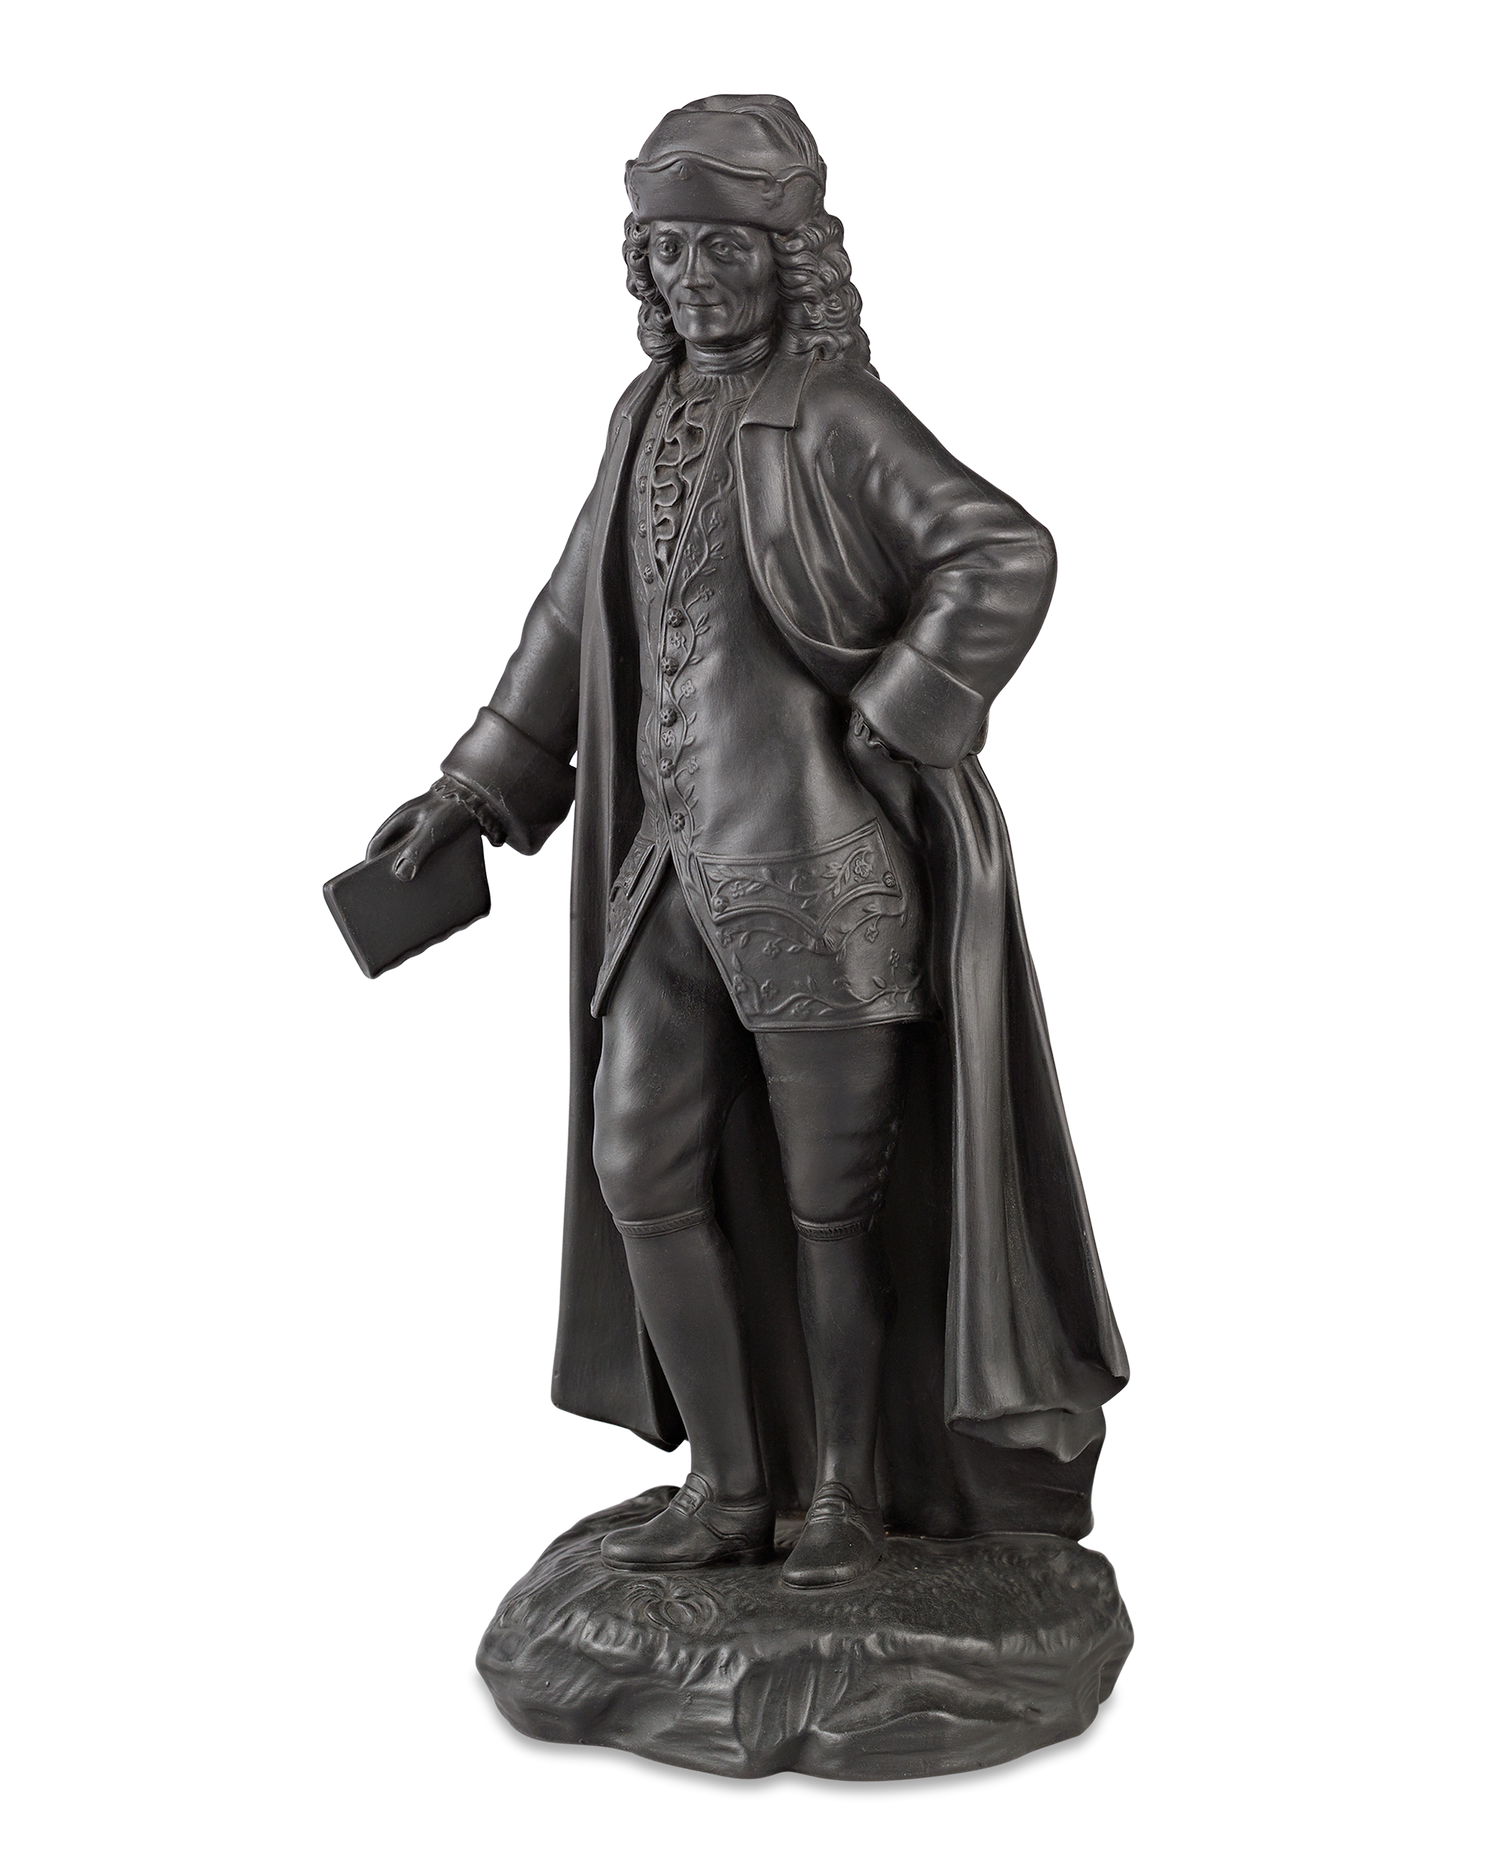 Black Basalt Figure of Voltaire by Wedgwood